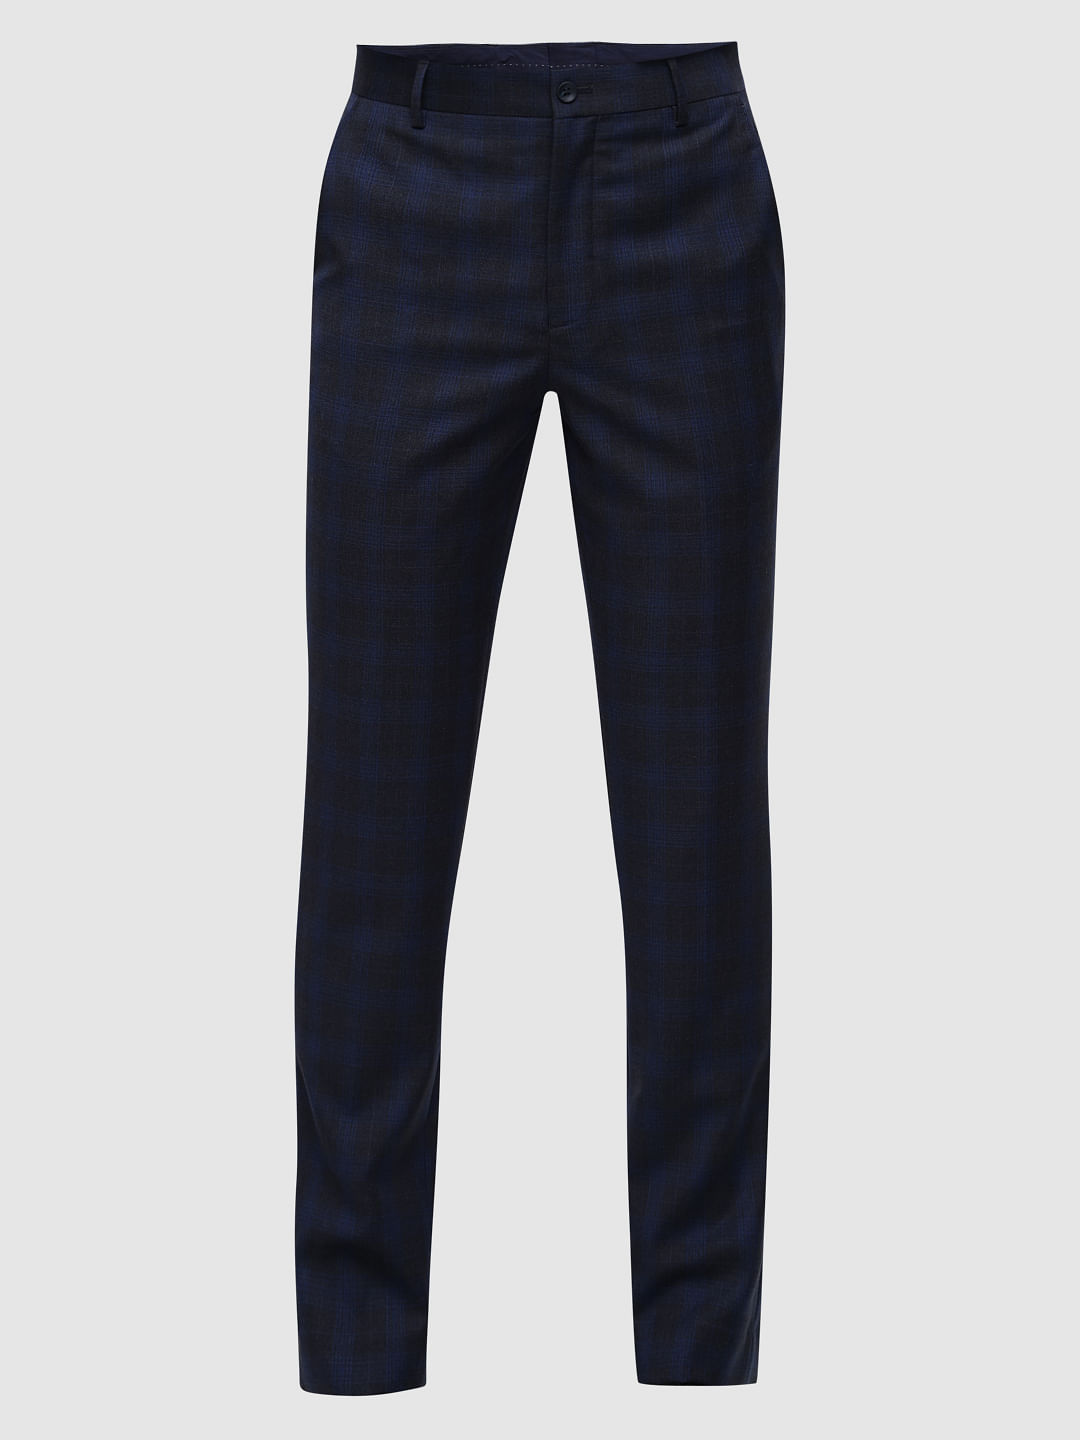 Grey Check Skinny Suit Trousers | New Look